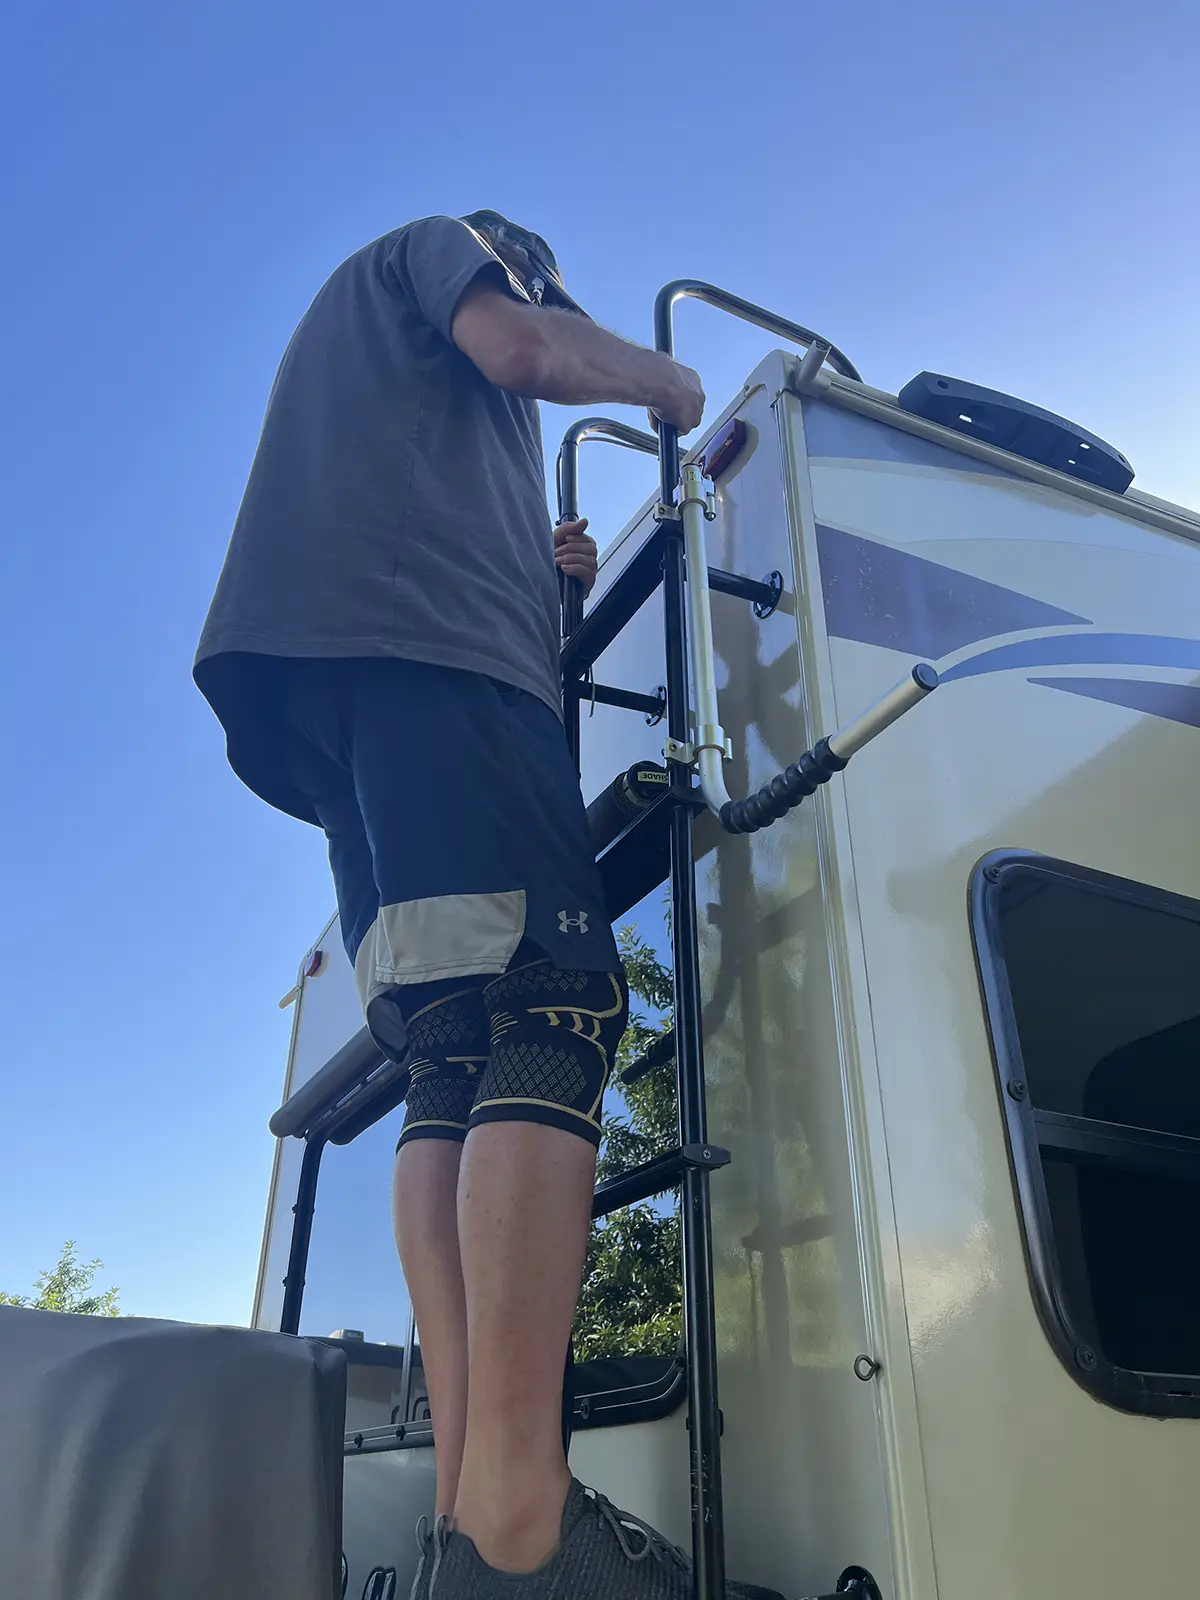 When the arms are turned to the sides, there is plenty of room to climb up the ladder safely. This feature allows the system to remain bolted to the ladder at all times.